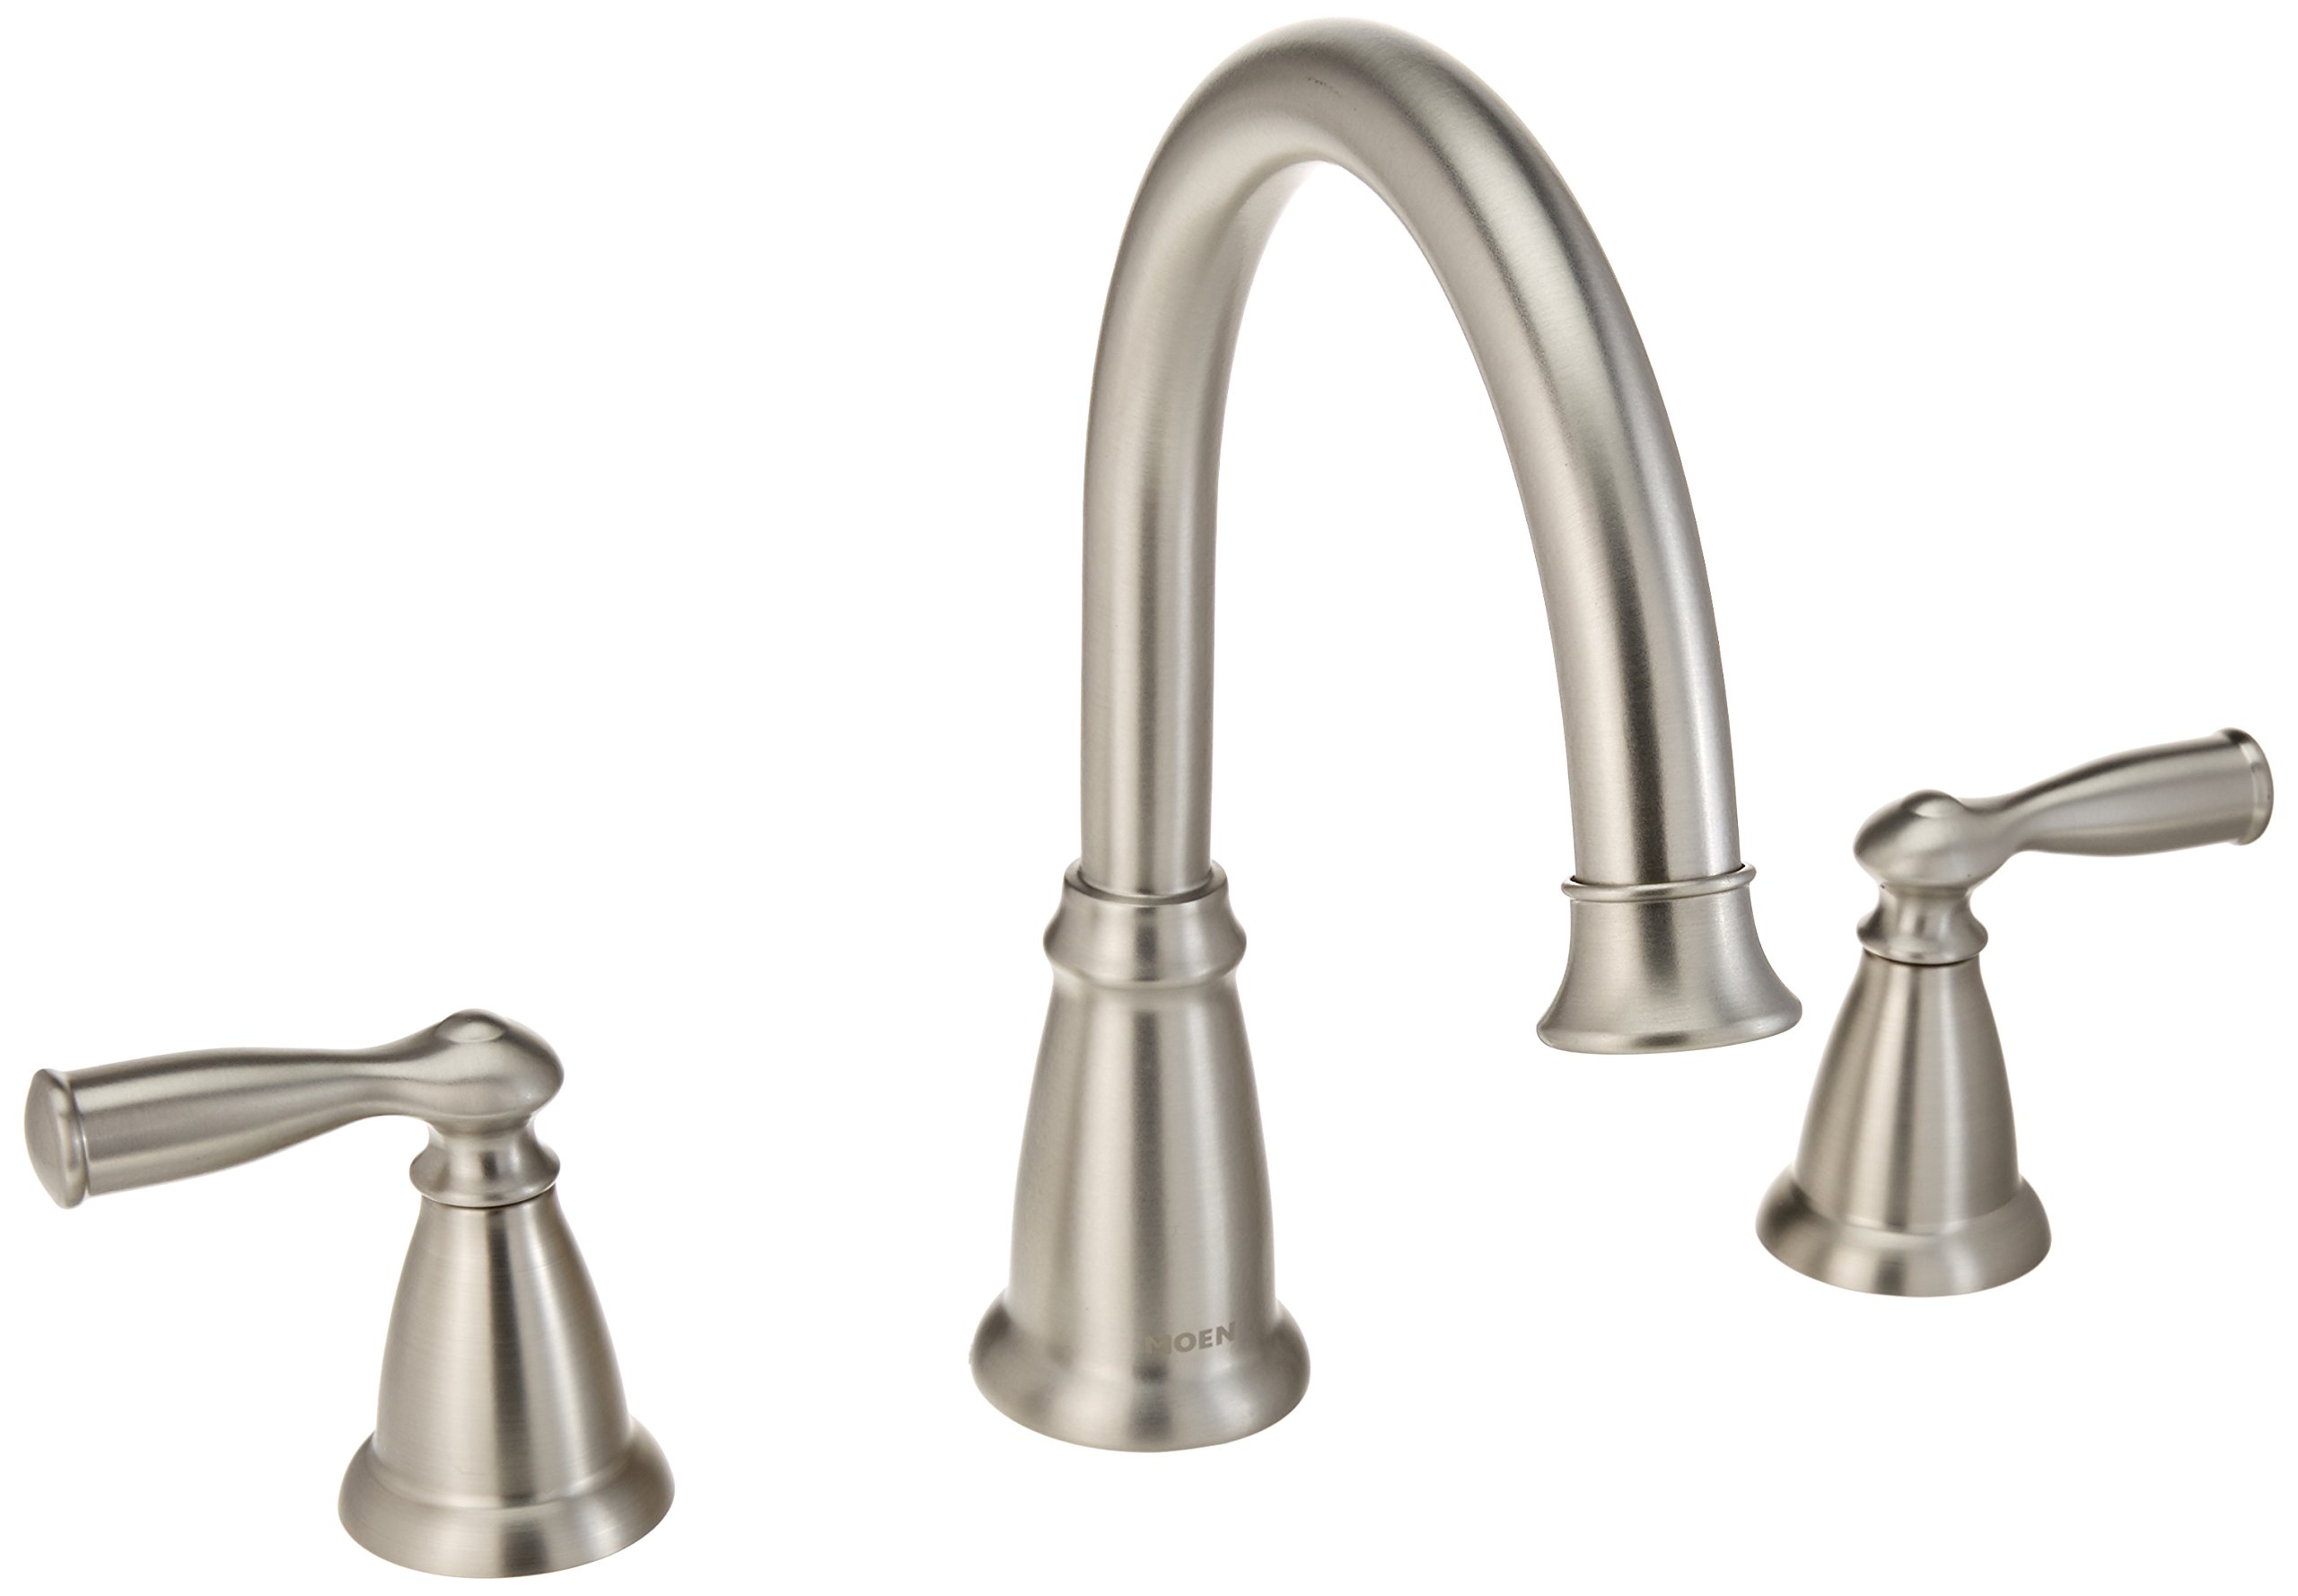 12 Amazing Moen Tub Faucet For 2023 1692759554 